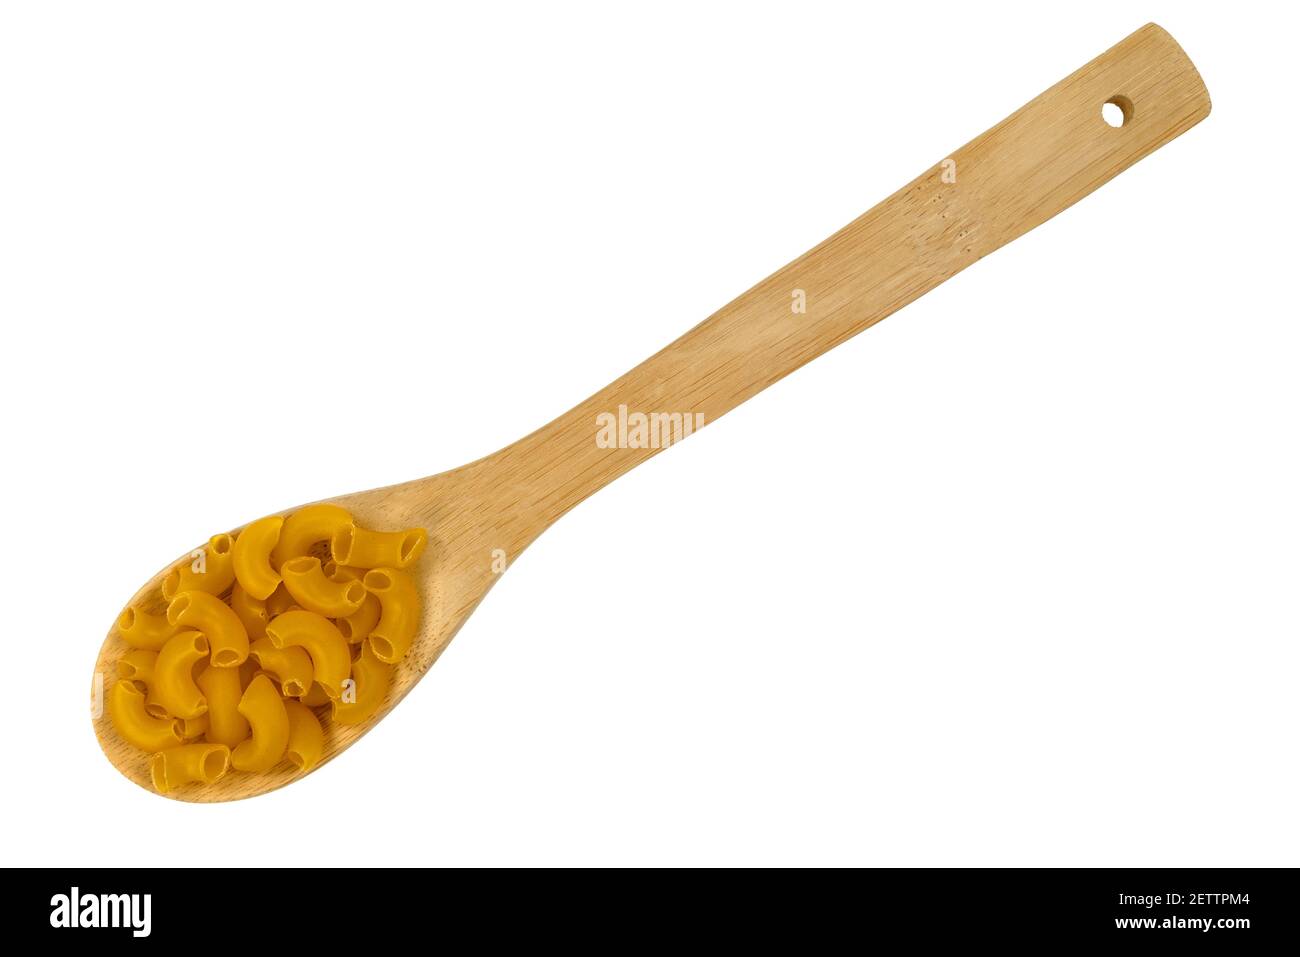 Top view of a portion of organic elbow macaroni on a wood kitchen spoon isolated on a white background. Stock Photo